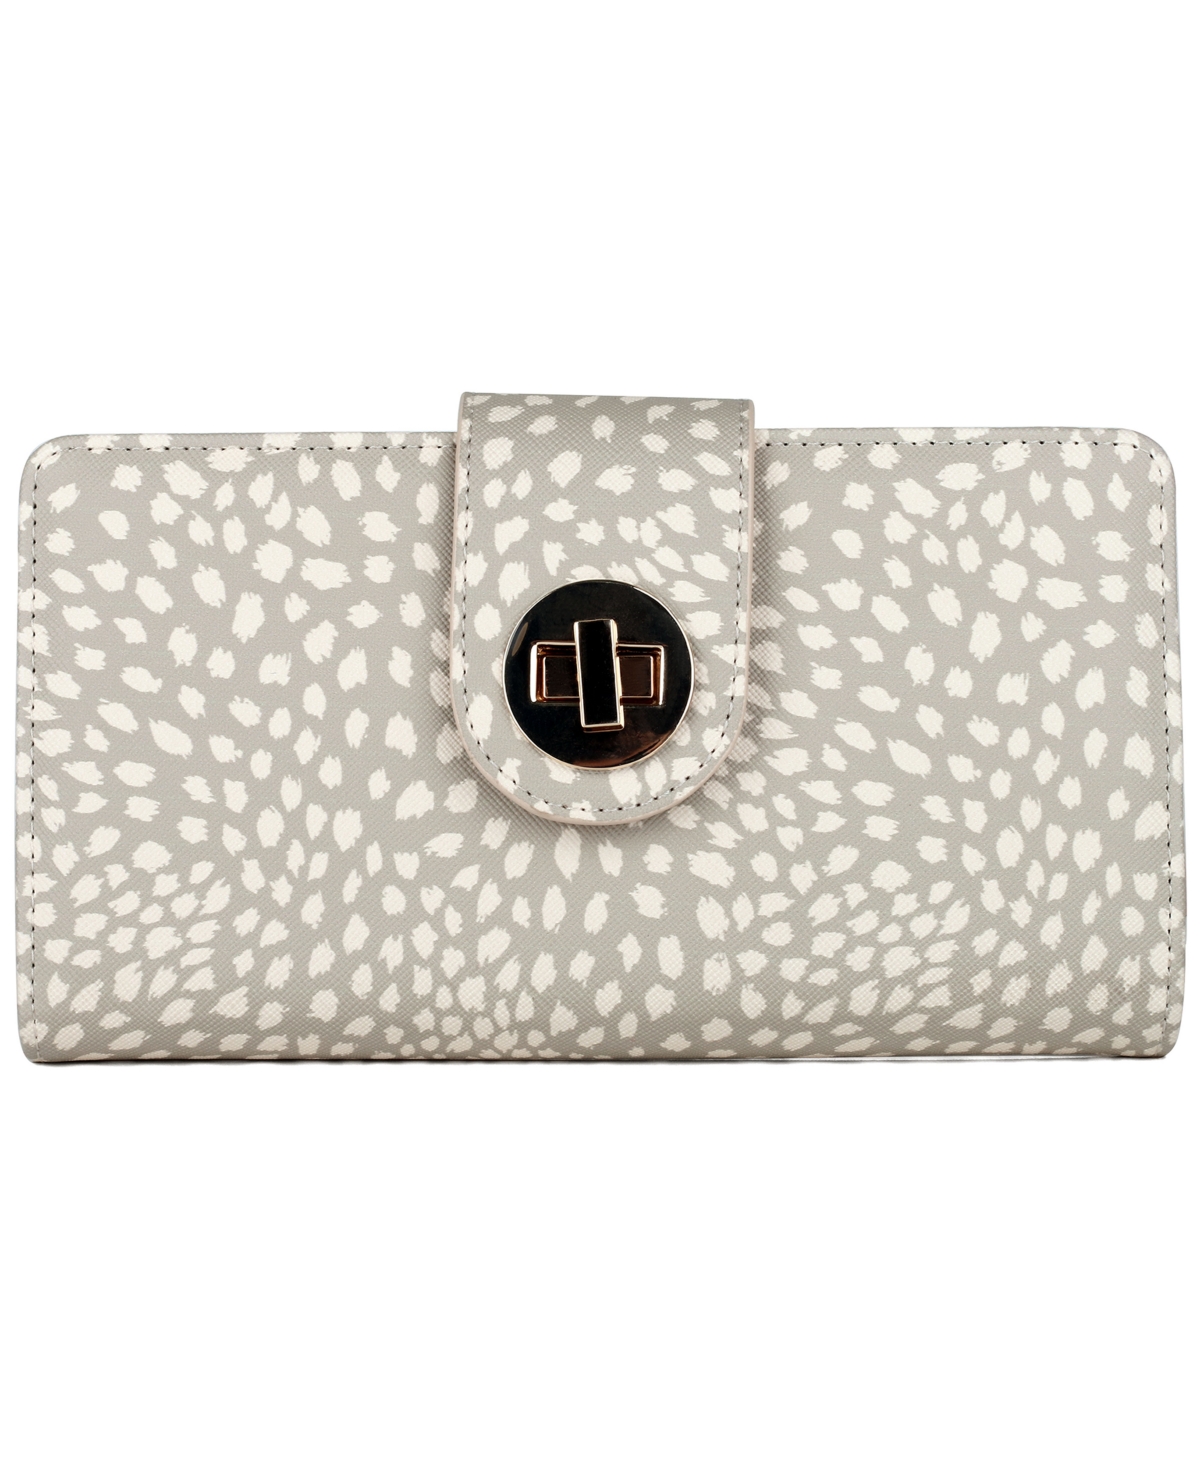 Women's Small Faux Leather Boxed Super Wallet - White Pepper Print